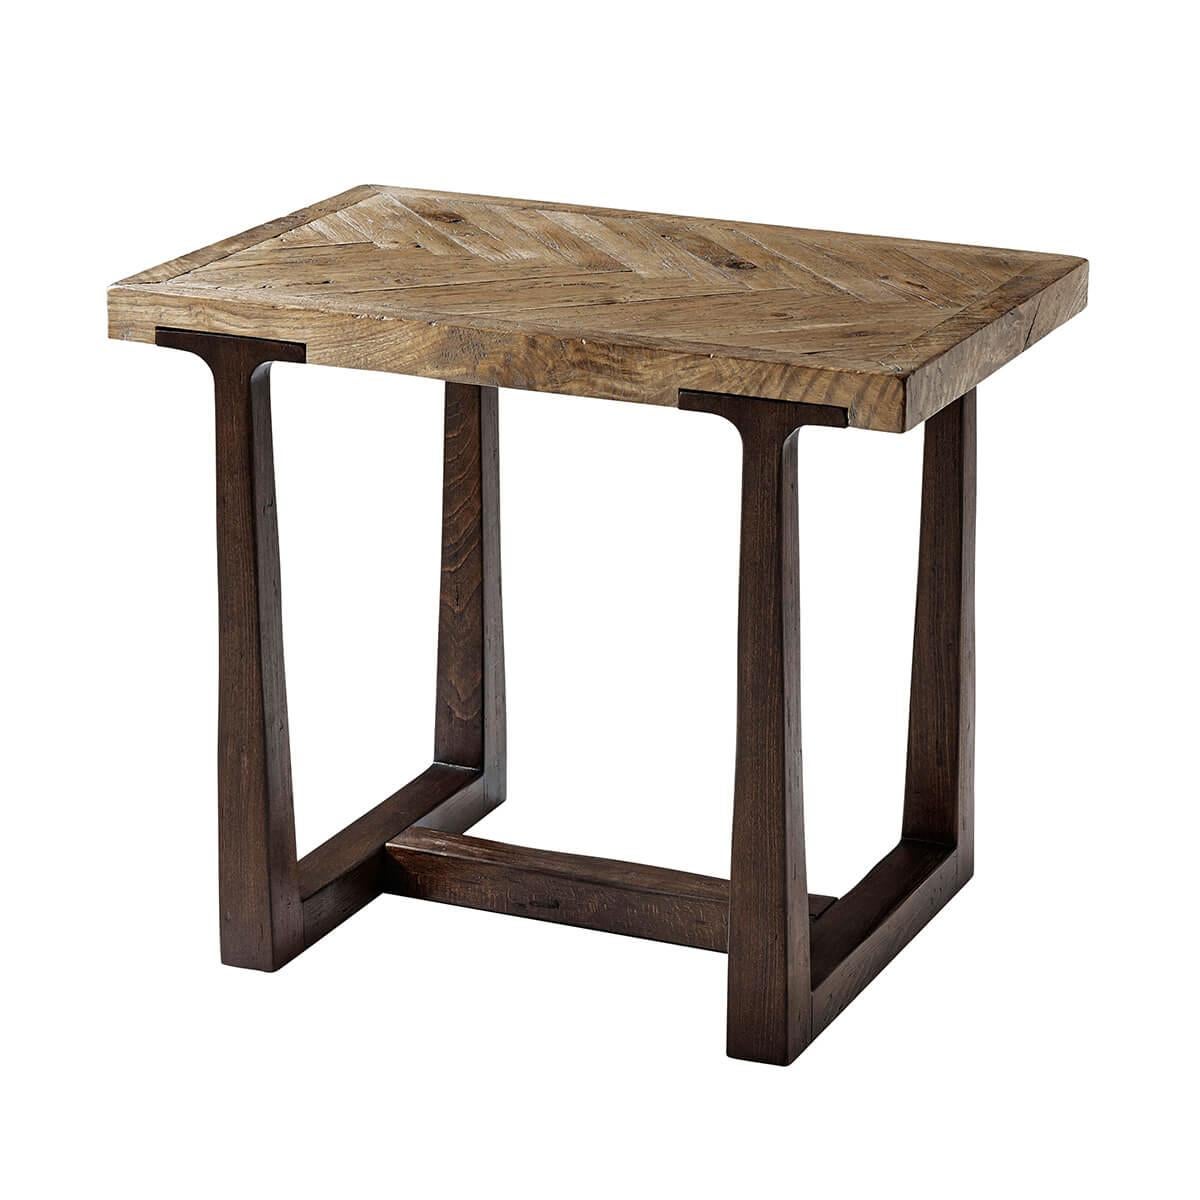 Oak Parquetry Side Table with ebonized solid wood clasp legs and stretchers. It has solid oak framed top and our 